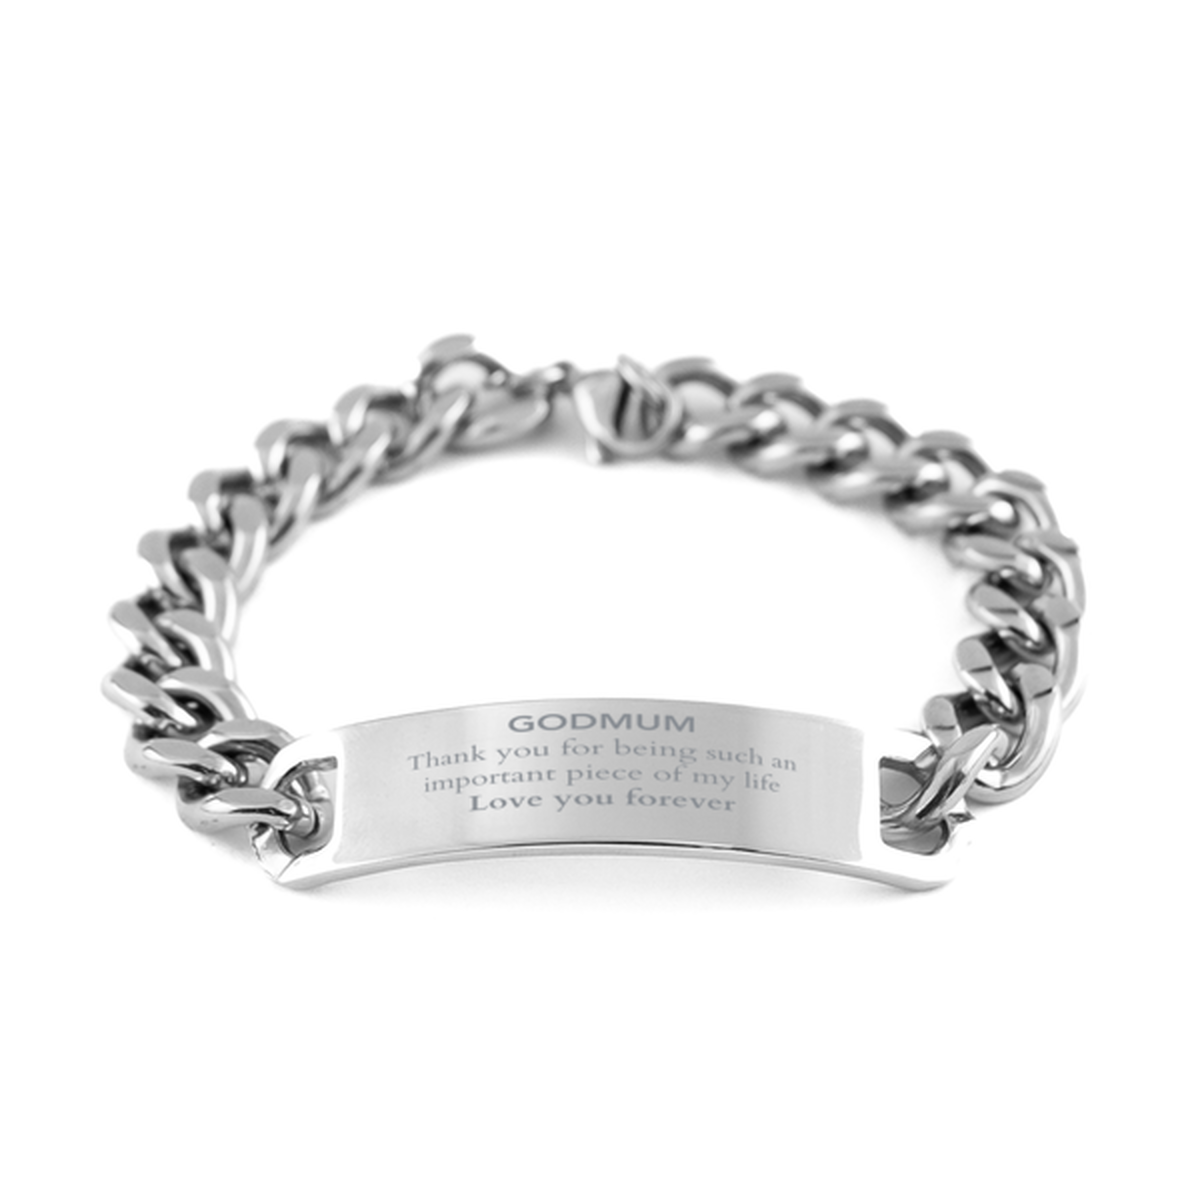 Appropriate Godmum Cuban Chain Stainless Steel Bracelet Epic Birthday Gifts for Godmum Thank you for being such an important piece of my life Godmum Christmas Mothers Fathers Day